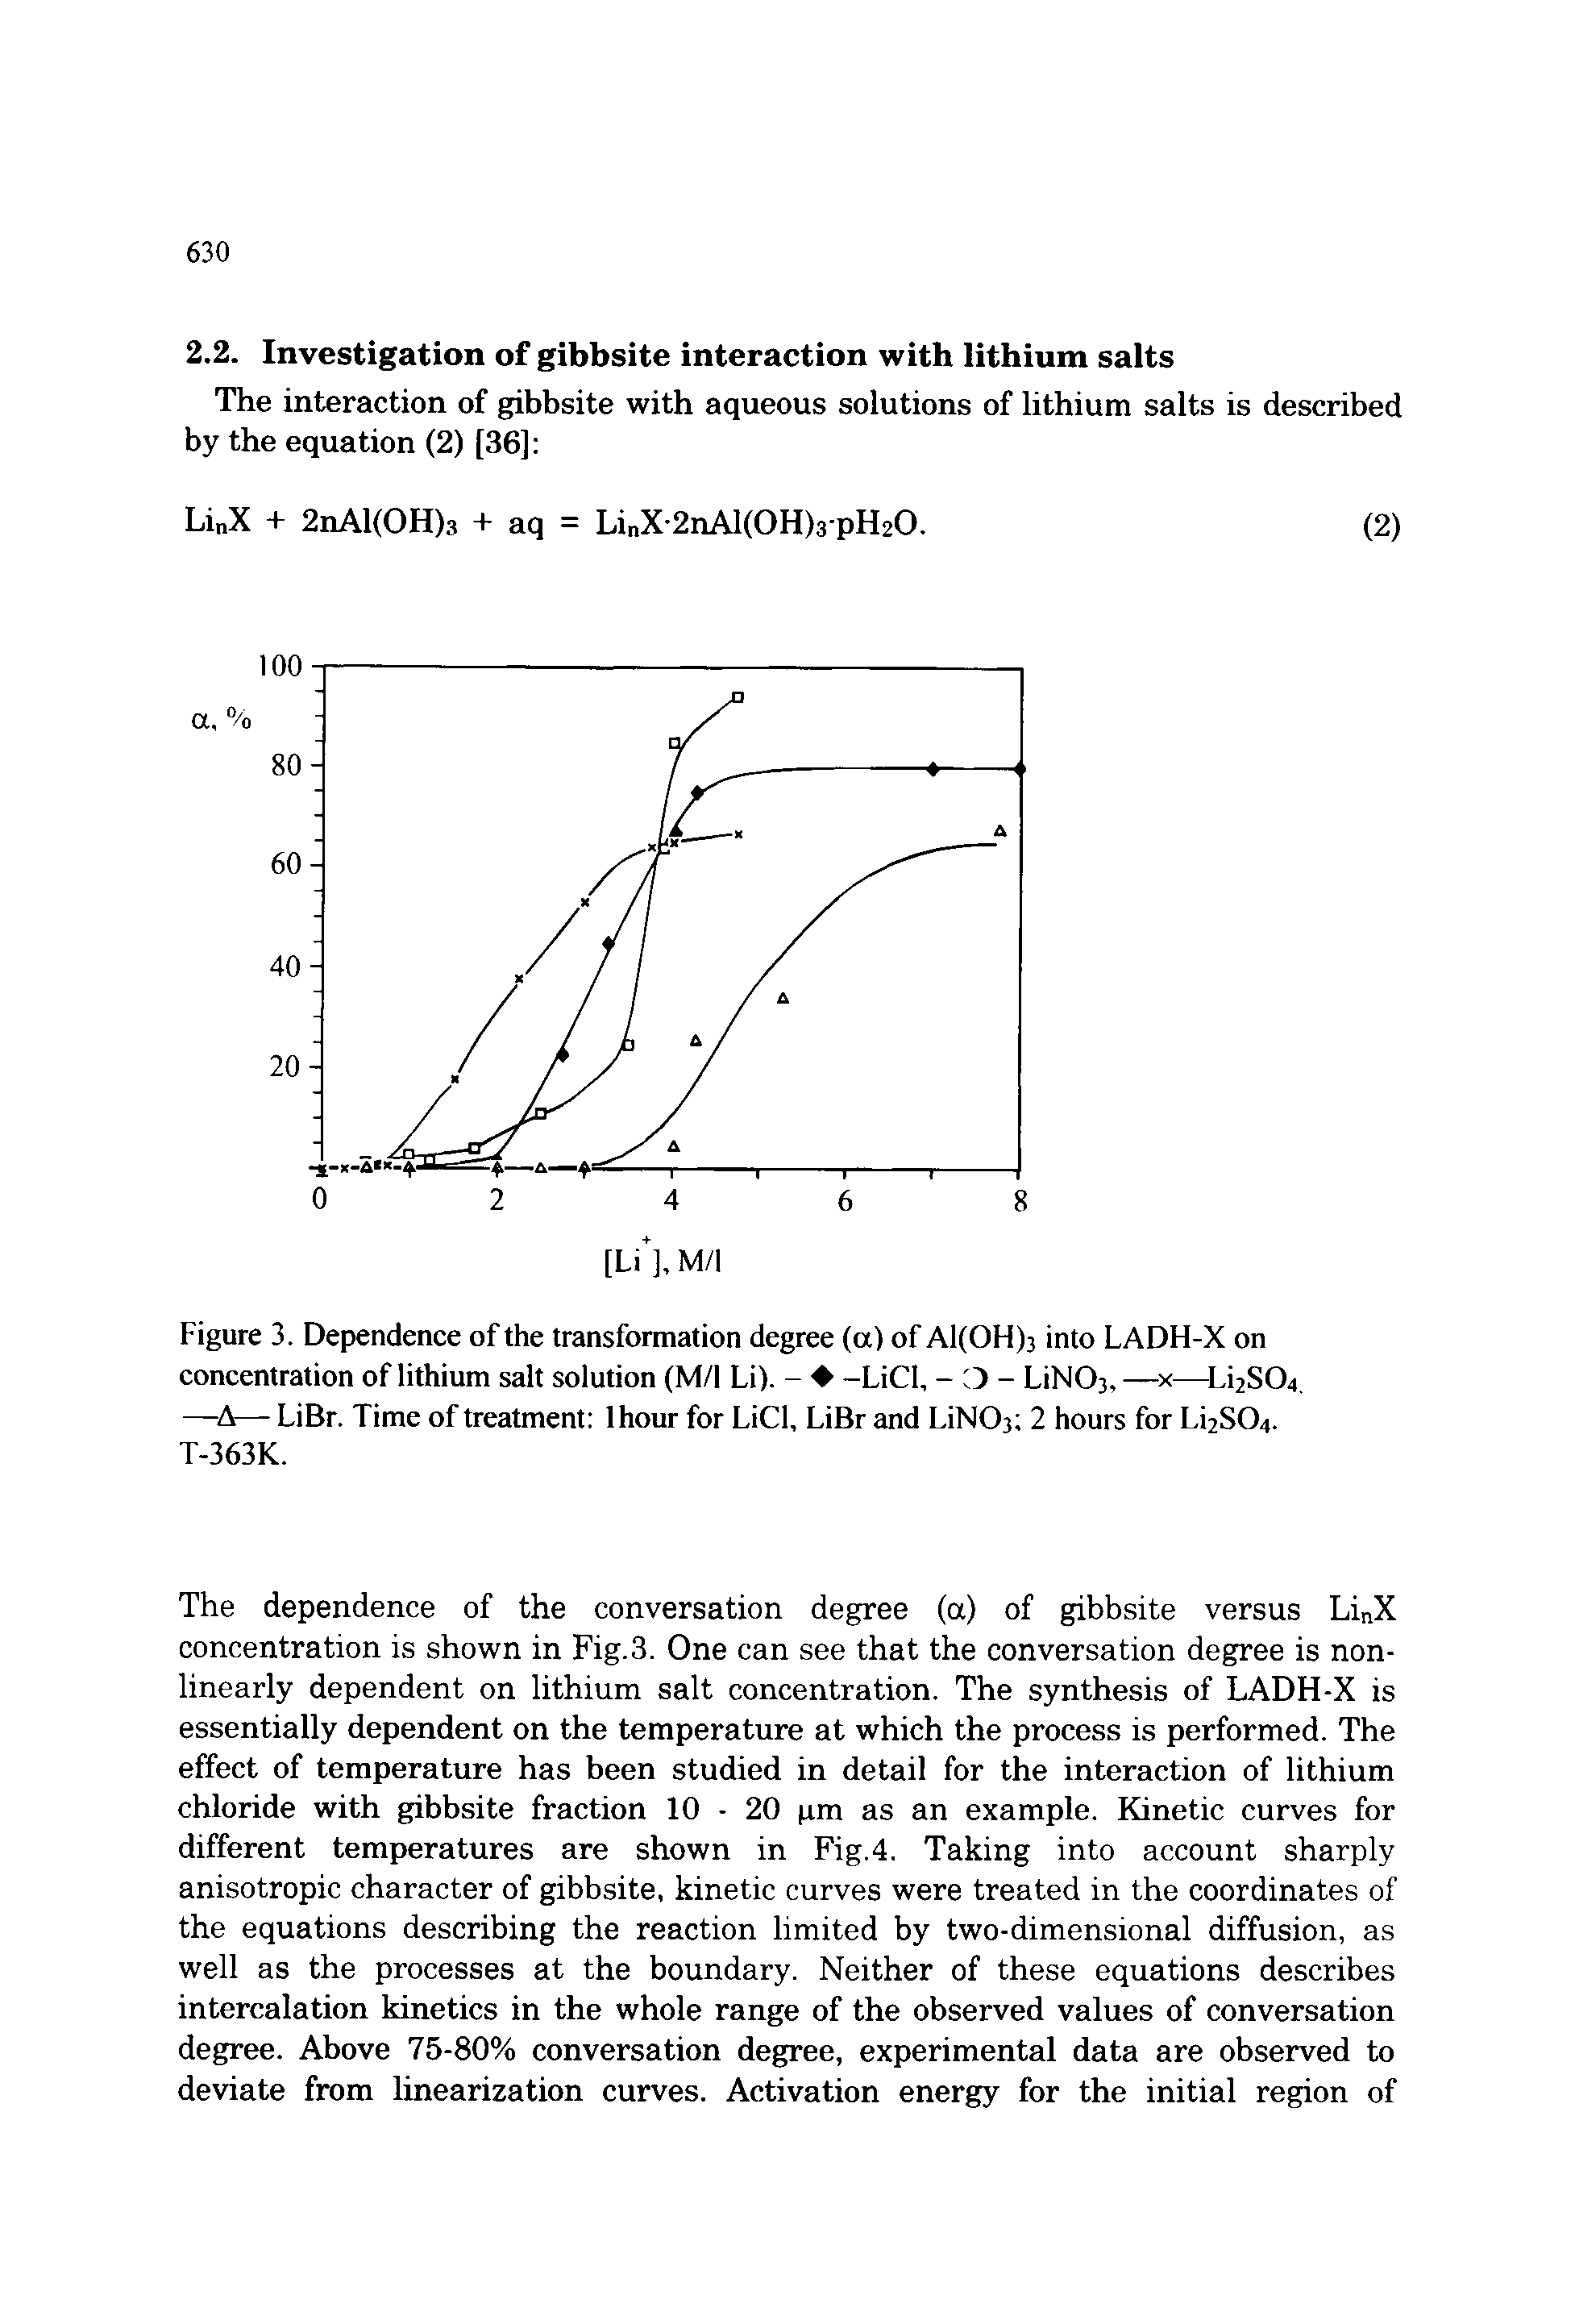 Figure 3. Dependence of the transformation degree (a) of Al(OH)3 into LADH-X on concentration of lithium salt solution (M/1 Li). - -LiCl, - 3 - LiN03, ——Li2S04, —A— LiBr. Time of treatment Ihour for LiCl, LiBr and LiN03 2 hours for Li2S04. T-363K.